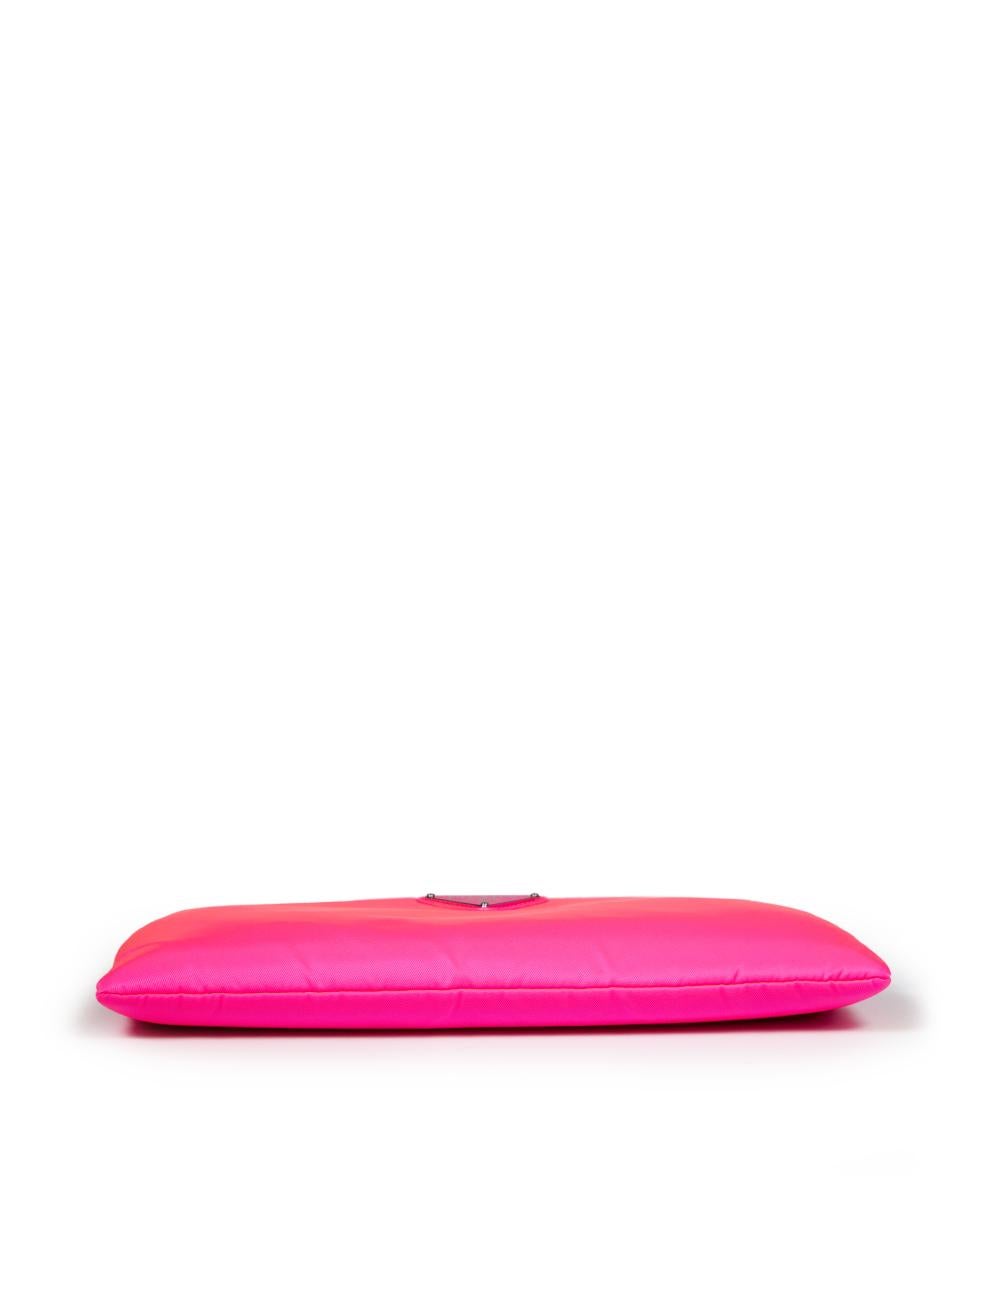 Women's Prada Neon Pink Padded Clutch with Chain For Sale